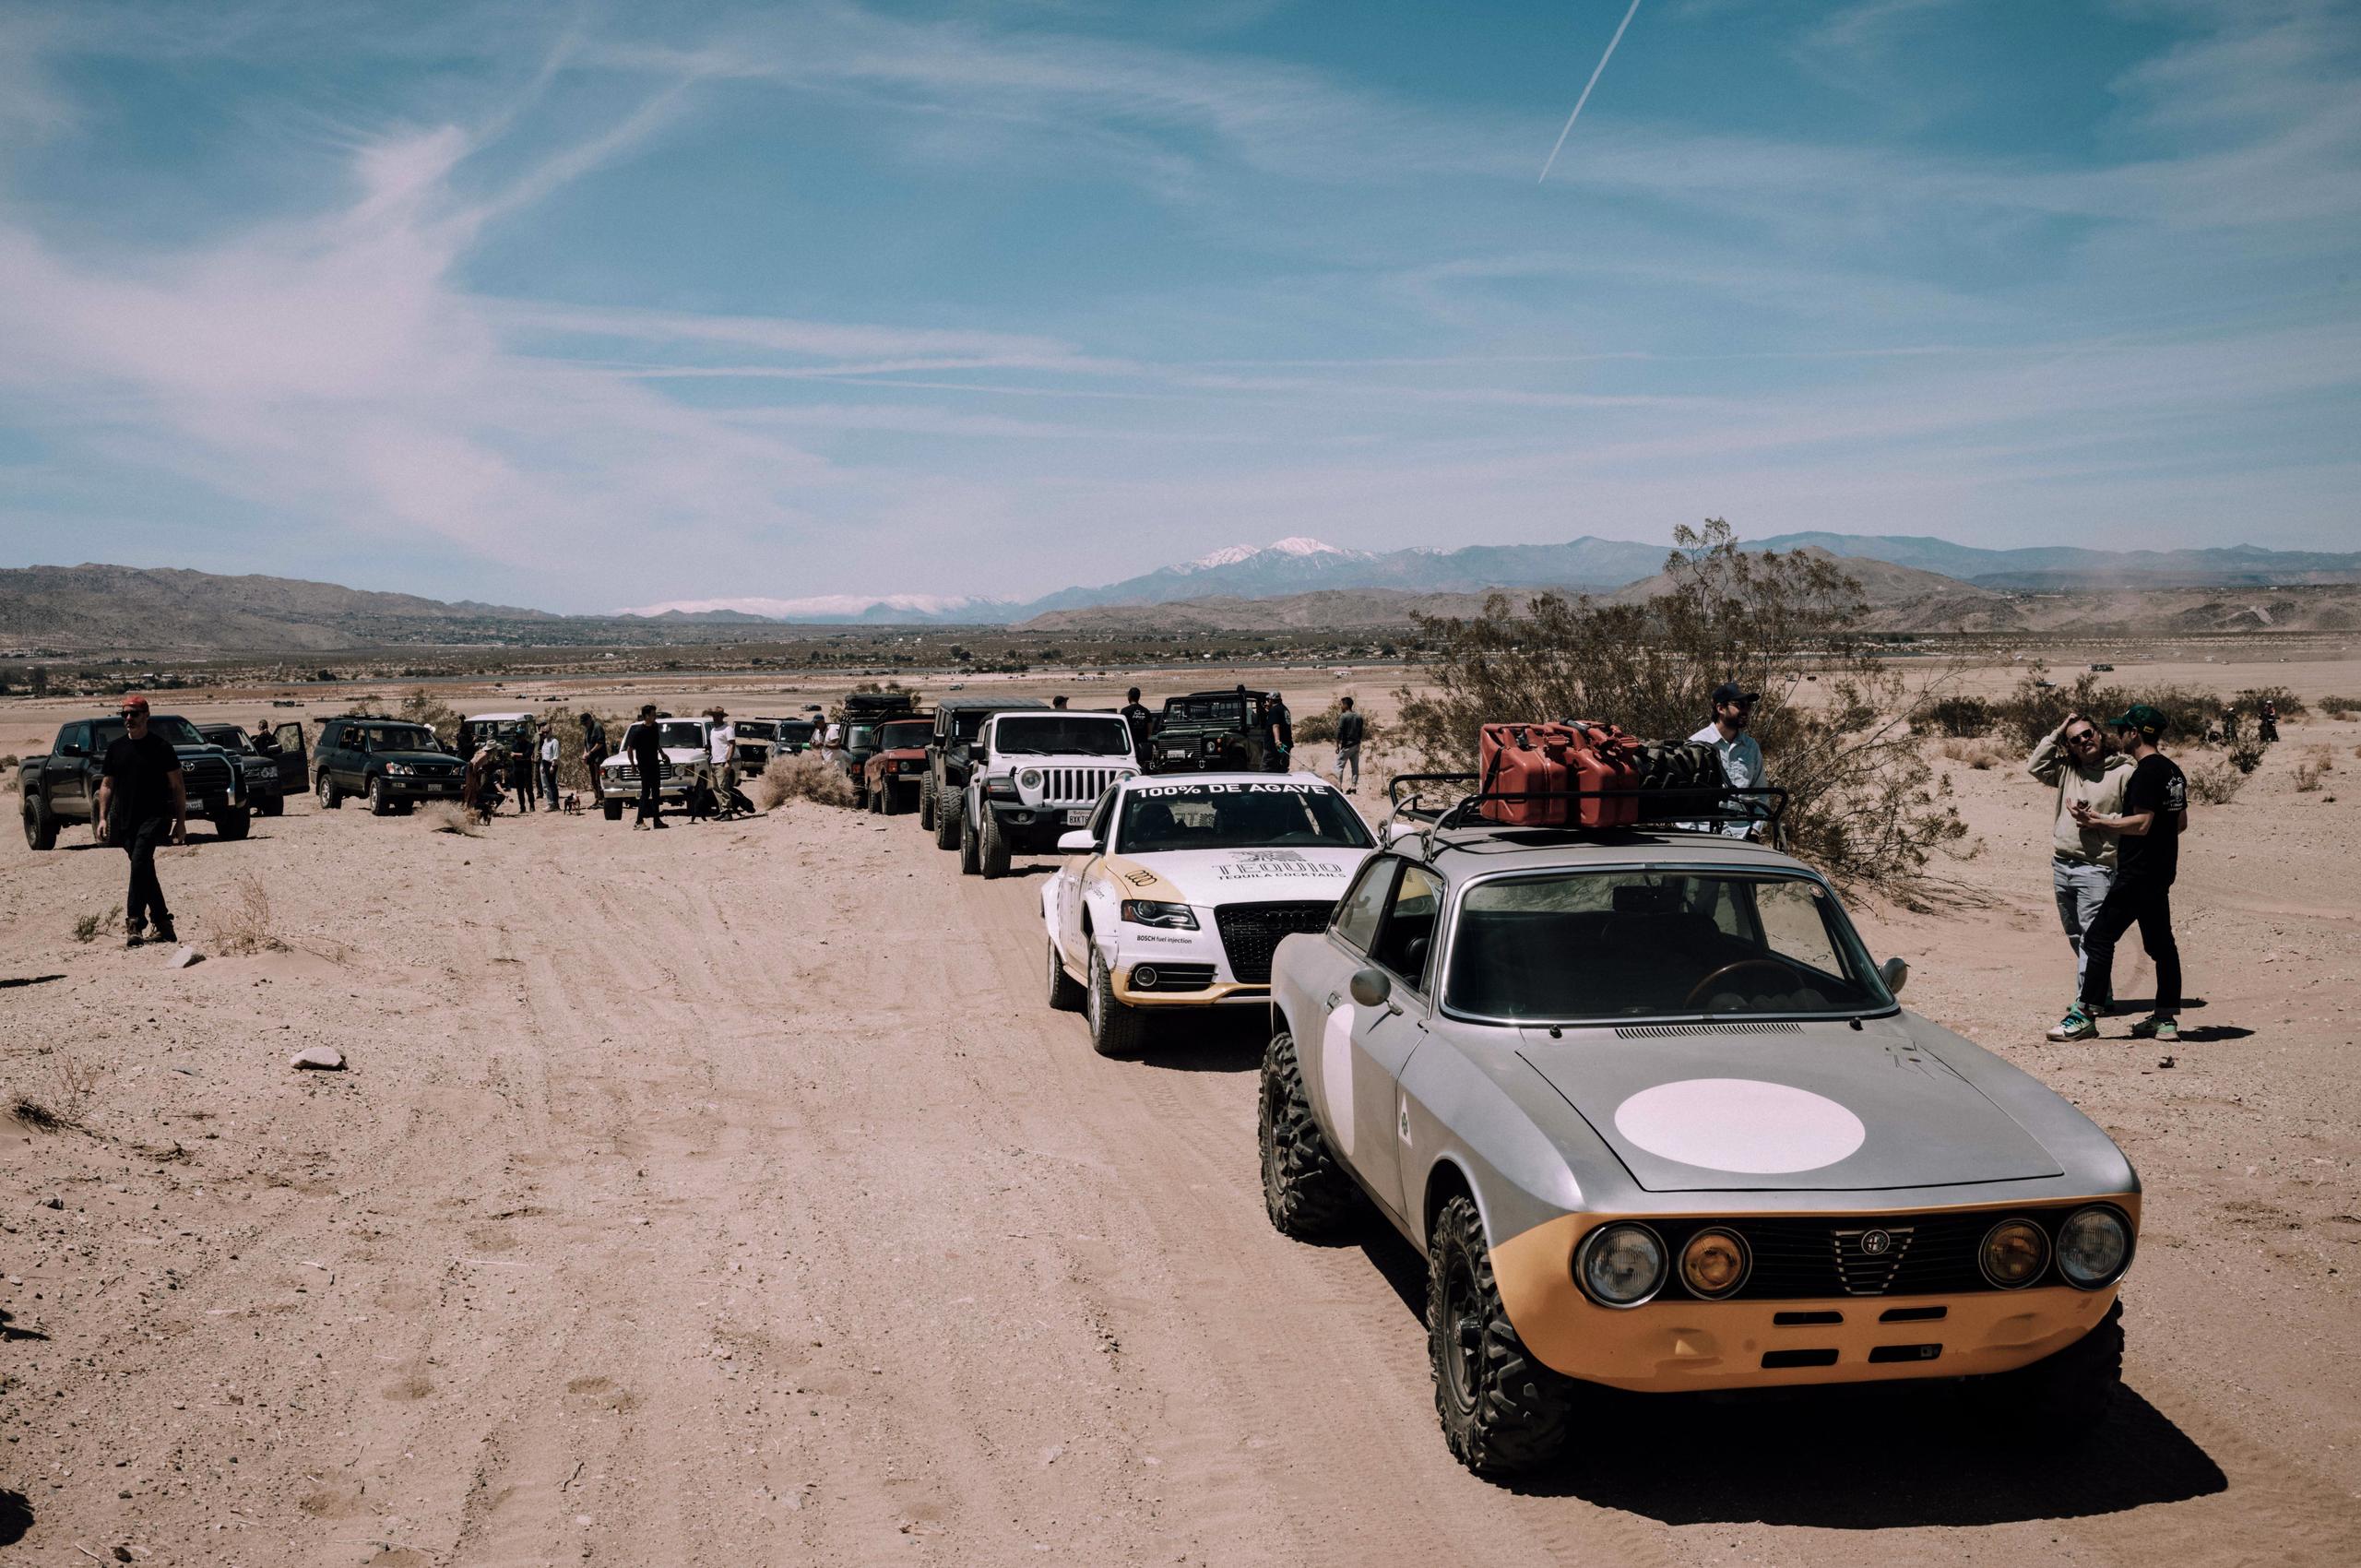 Cars and people during Aether Rally in Joshua Tree National Park